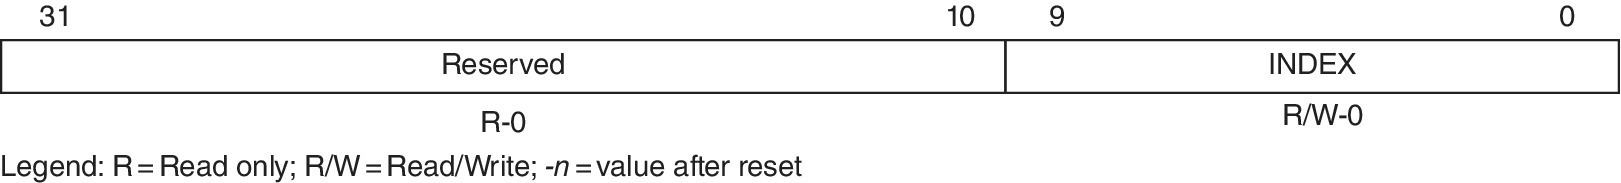 Schematic of system interrupt status indexed set register (STATUS_SET_INDEX_REG), displaying a rectangle divided into 2 segments labeled reserved (R-0) and index (R/W-0).